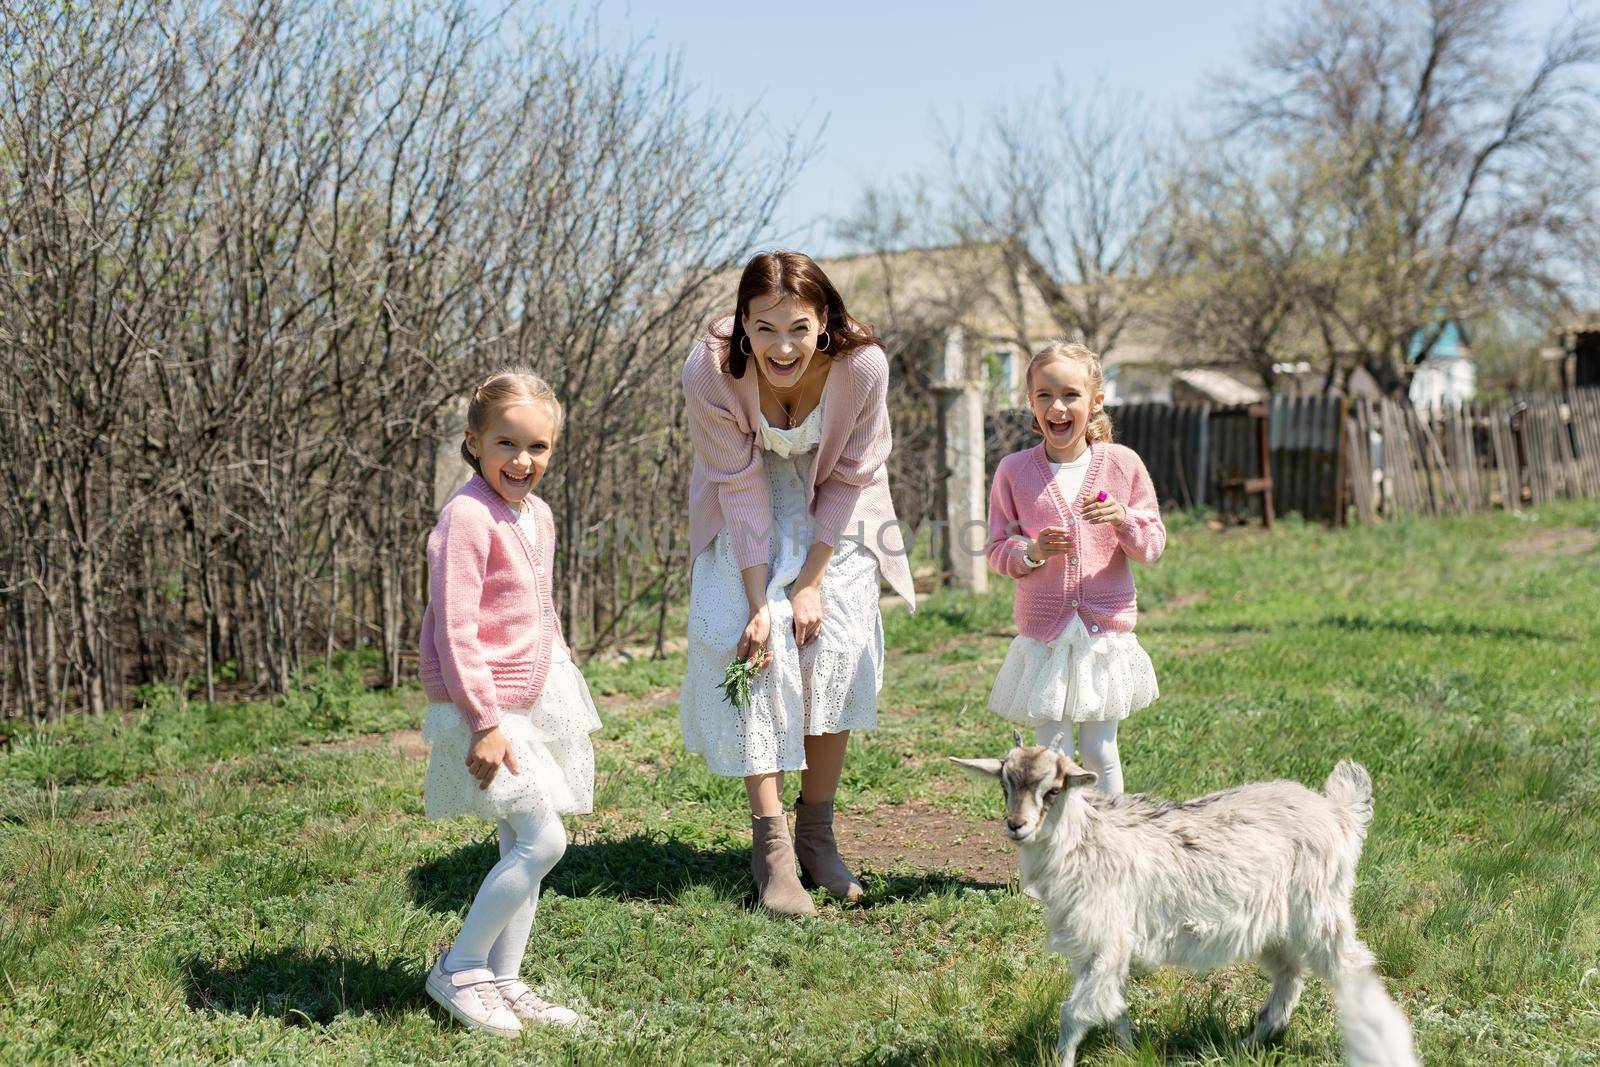 Mother with her young twin daughters feeds a goat in a meadow in the village.